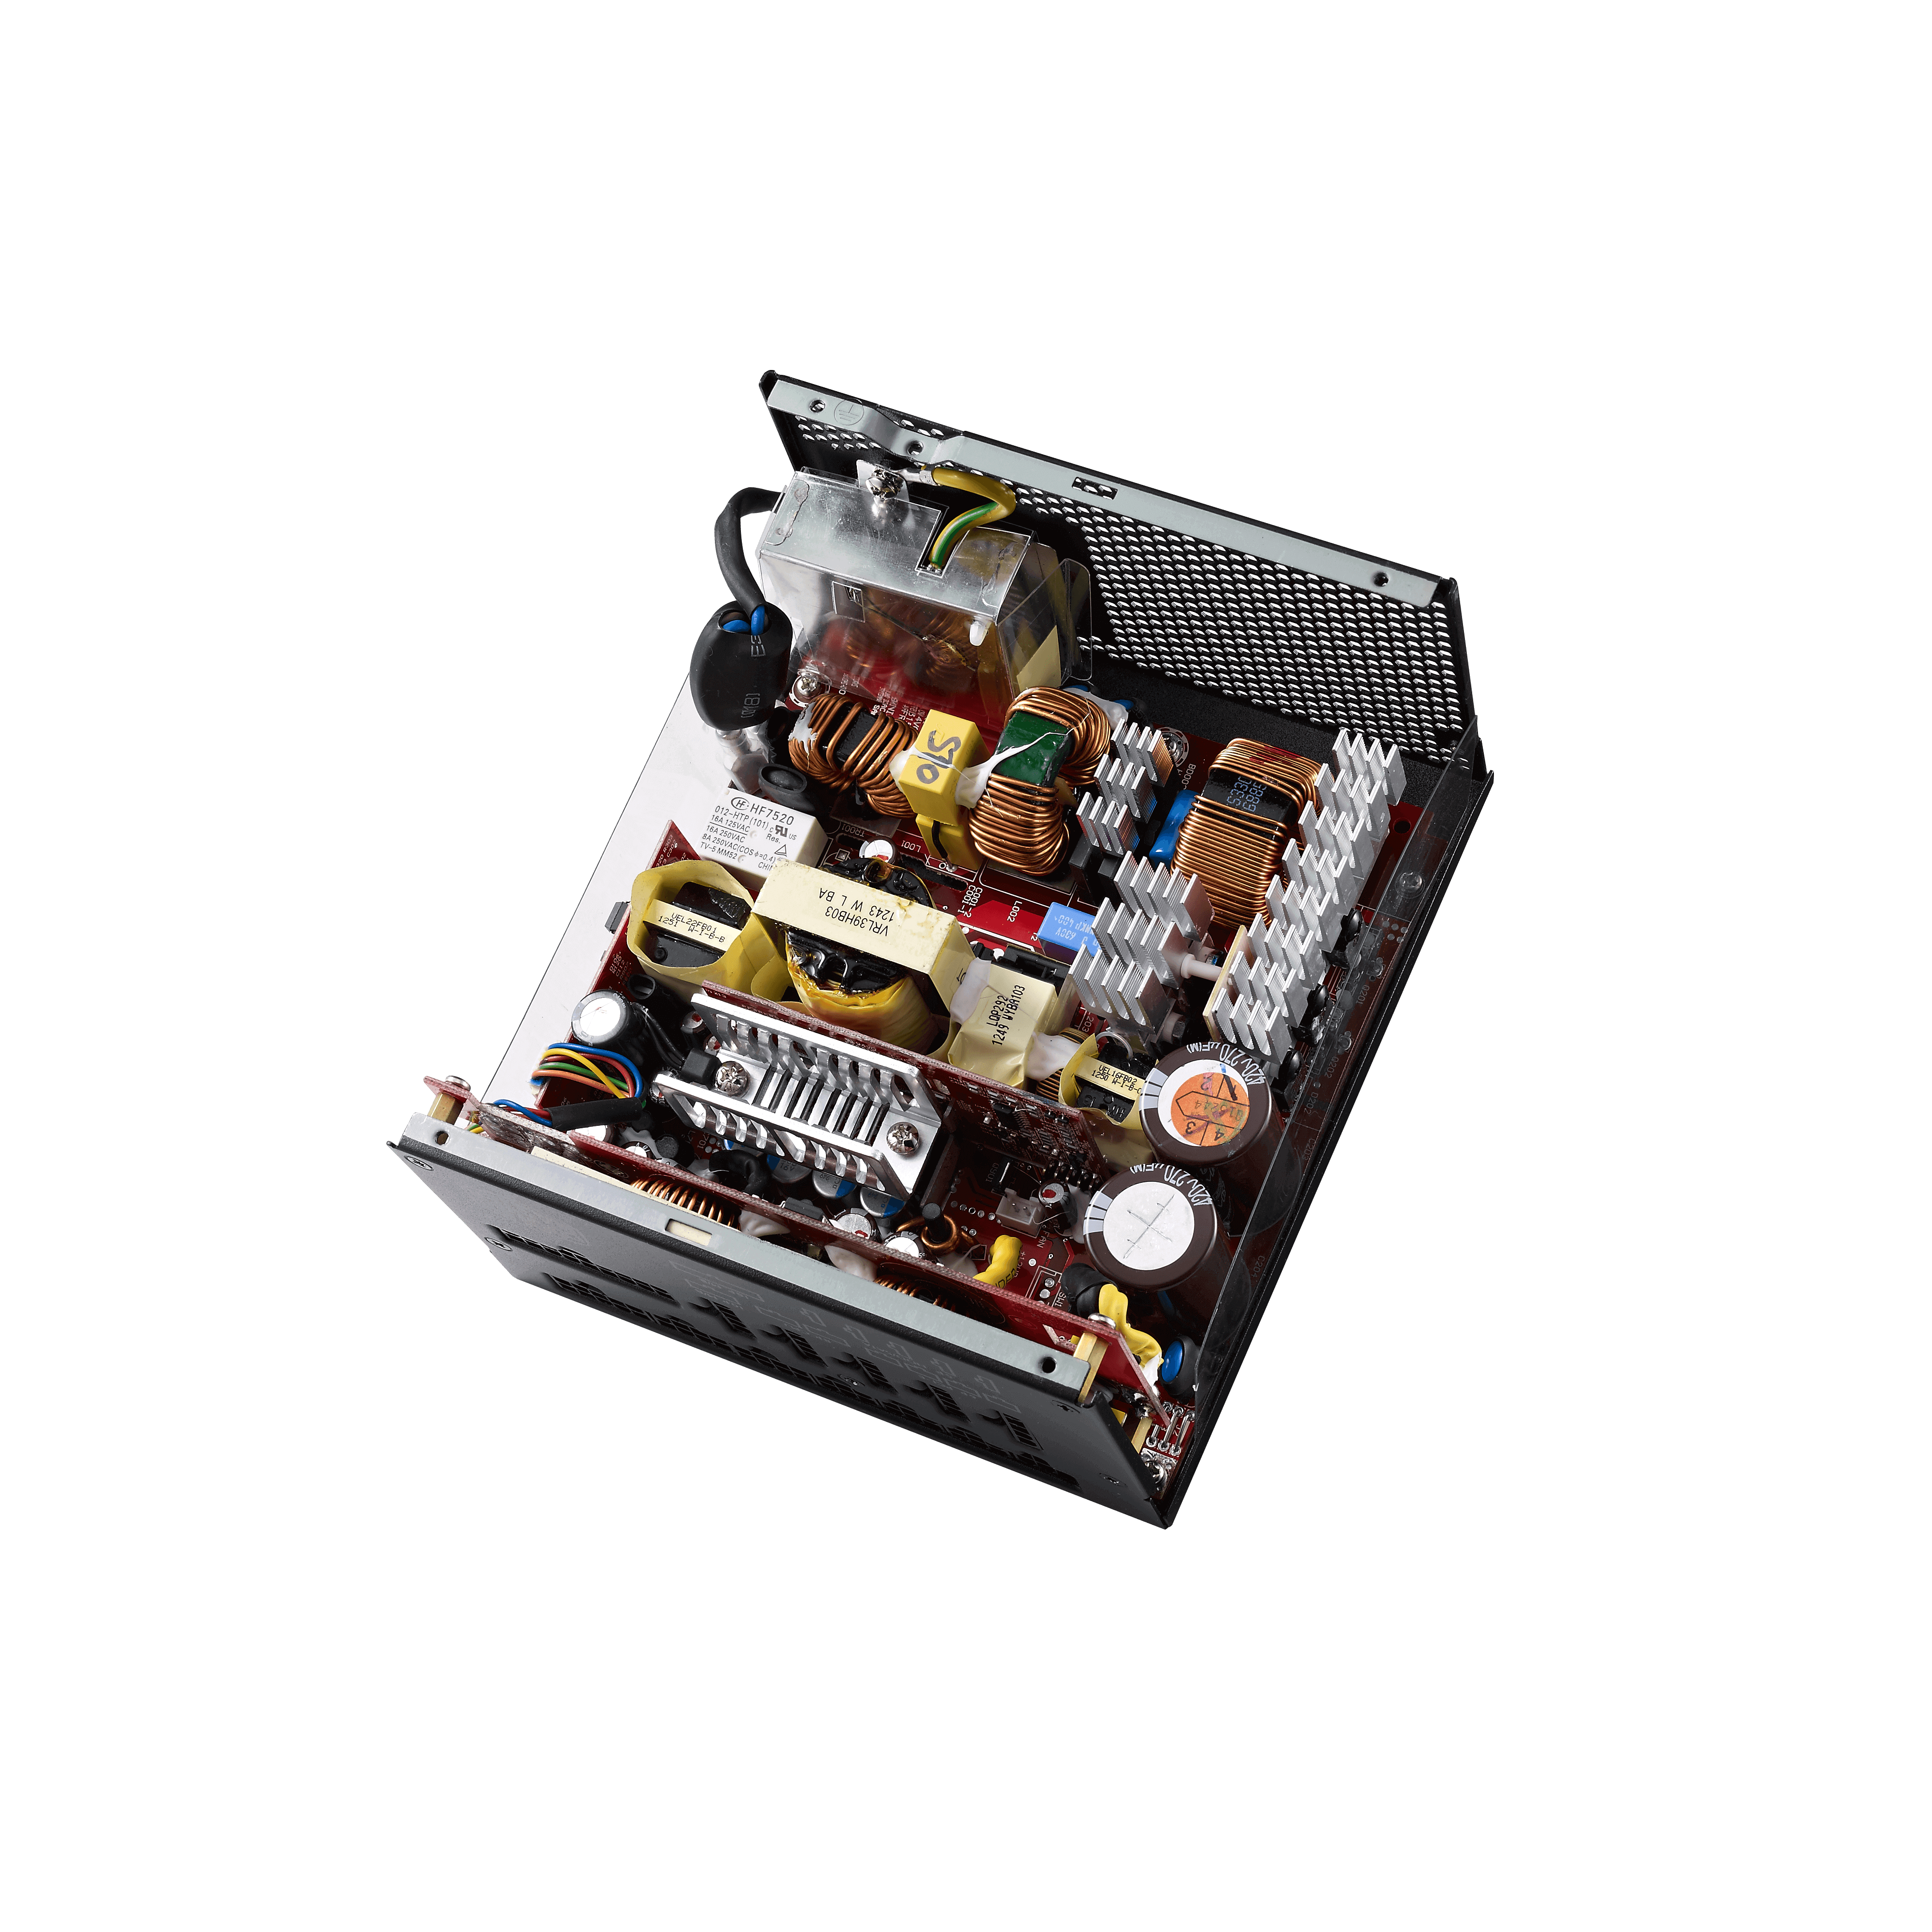 V850 850W Fully Modular 80 PLUS Gold Certified Power Supply